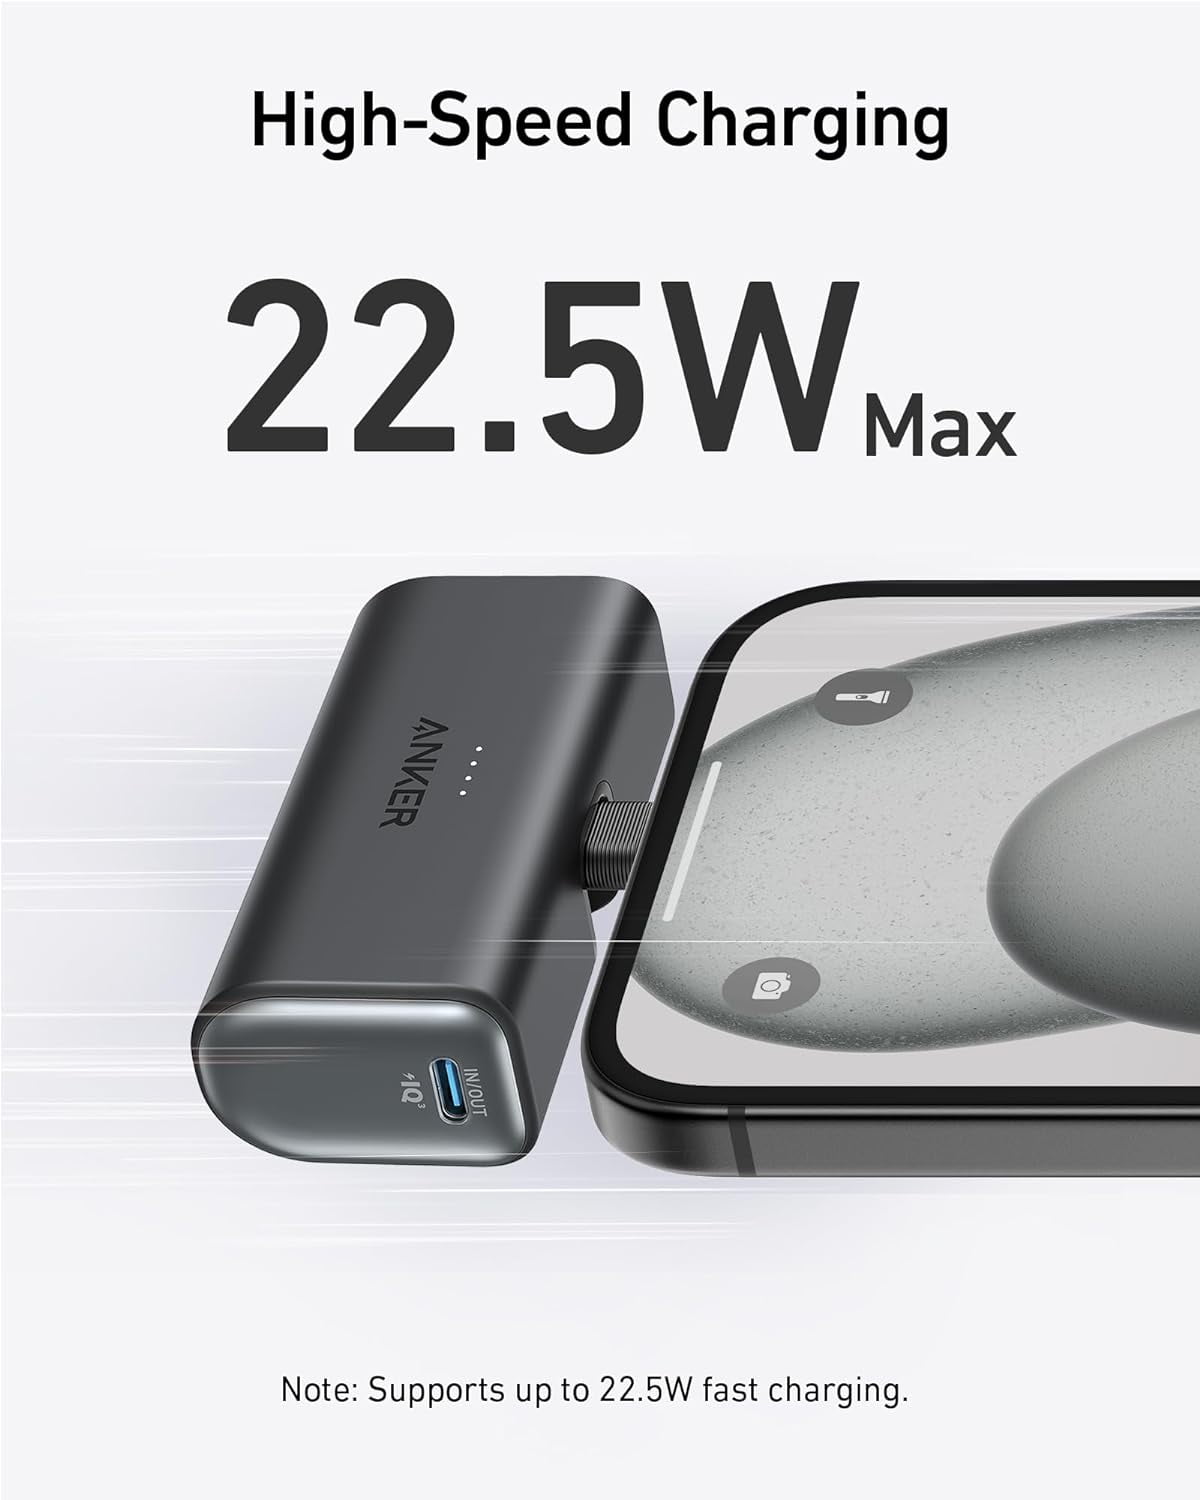 Anker Nano Power Bank with Built-in USB-C Connector A1653 Black PREOWNED!  194644136543